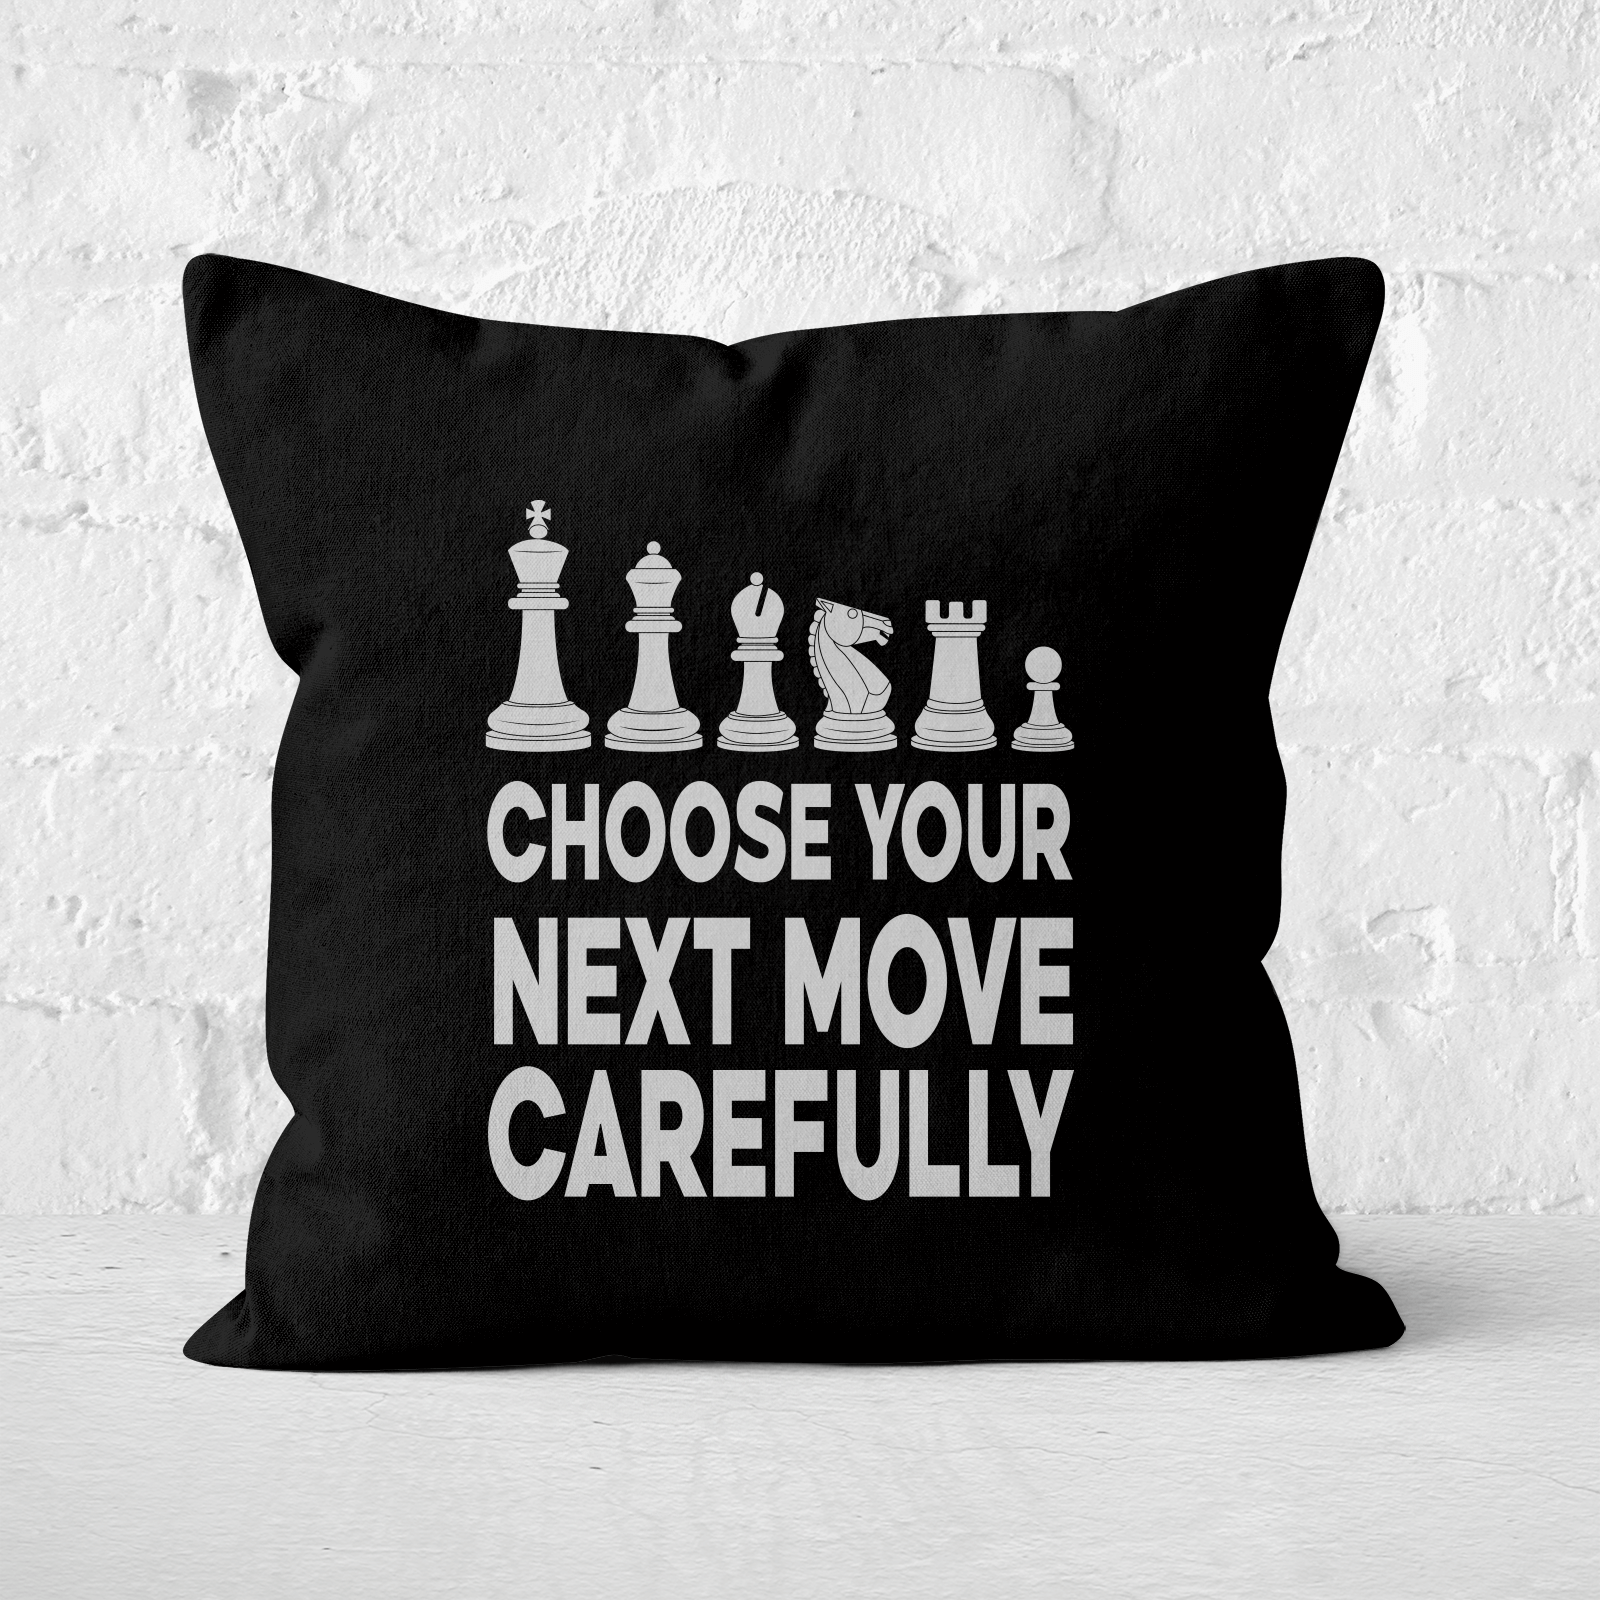 Choose Your Next Move Carefully Monochrome Square Cushion - 60x60cm - Soft Touch